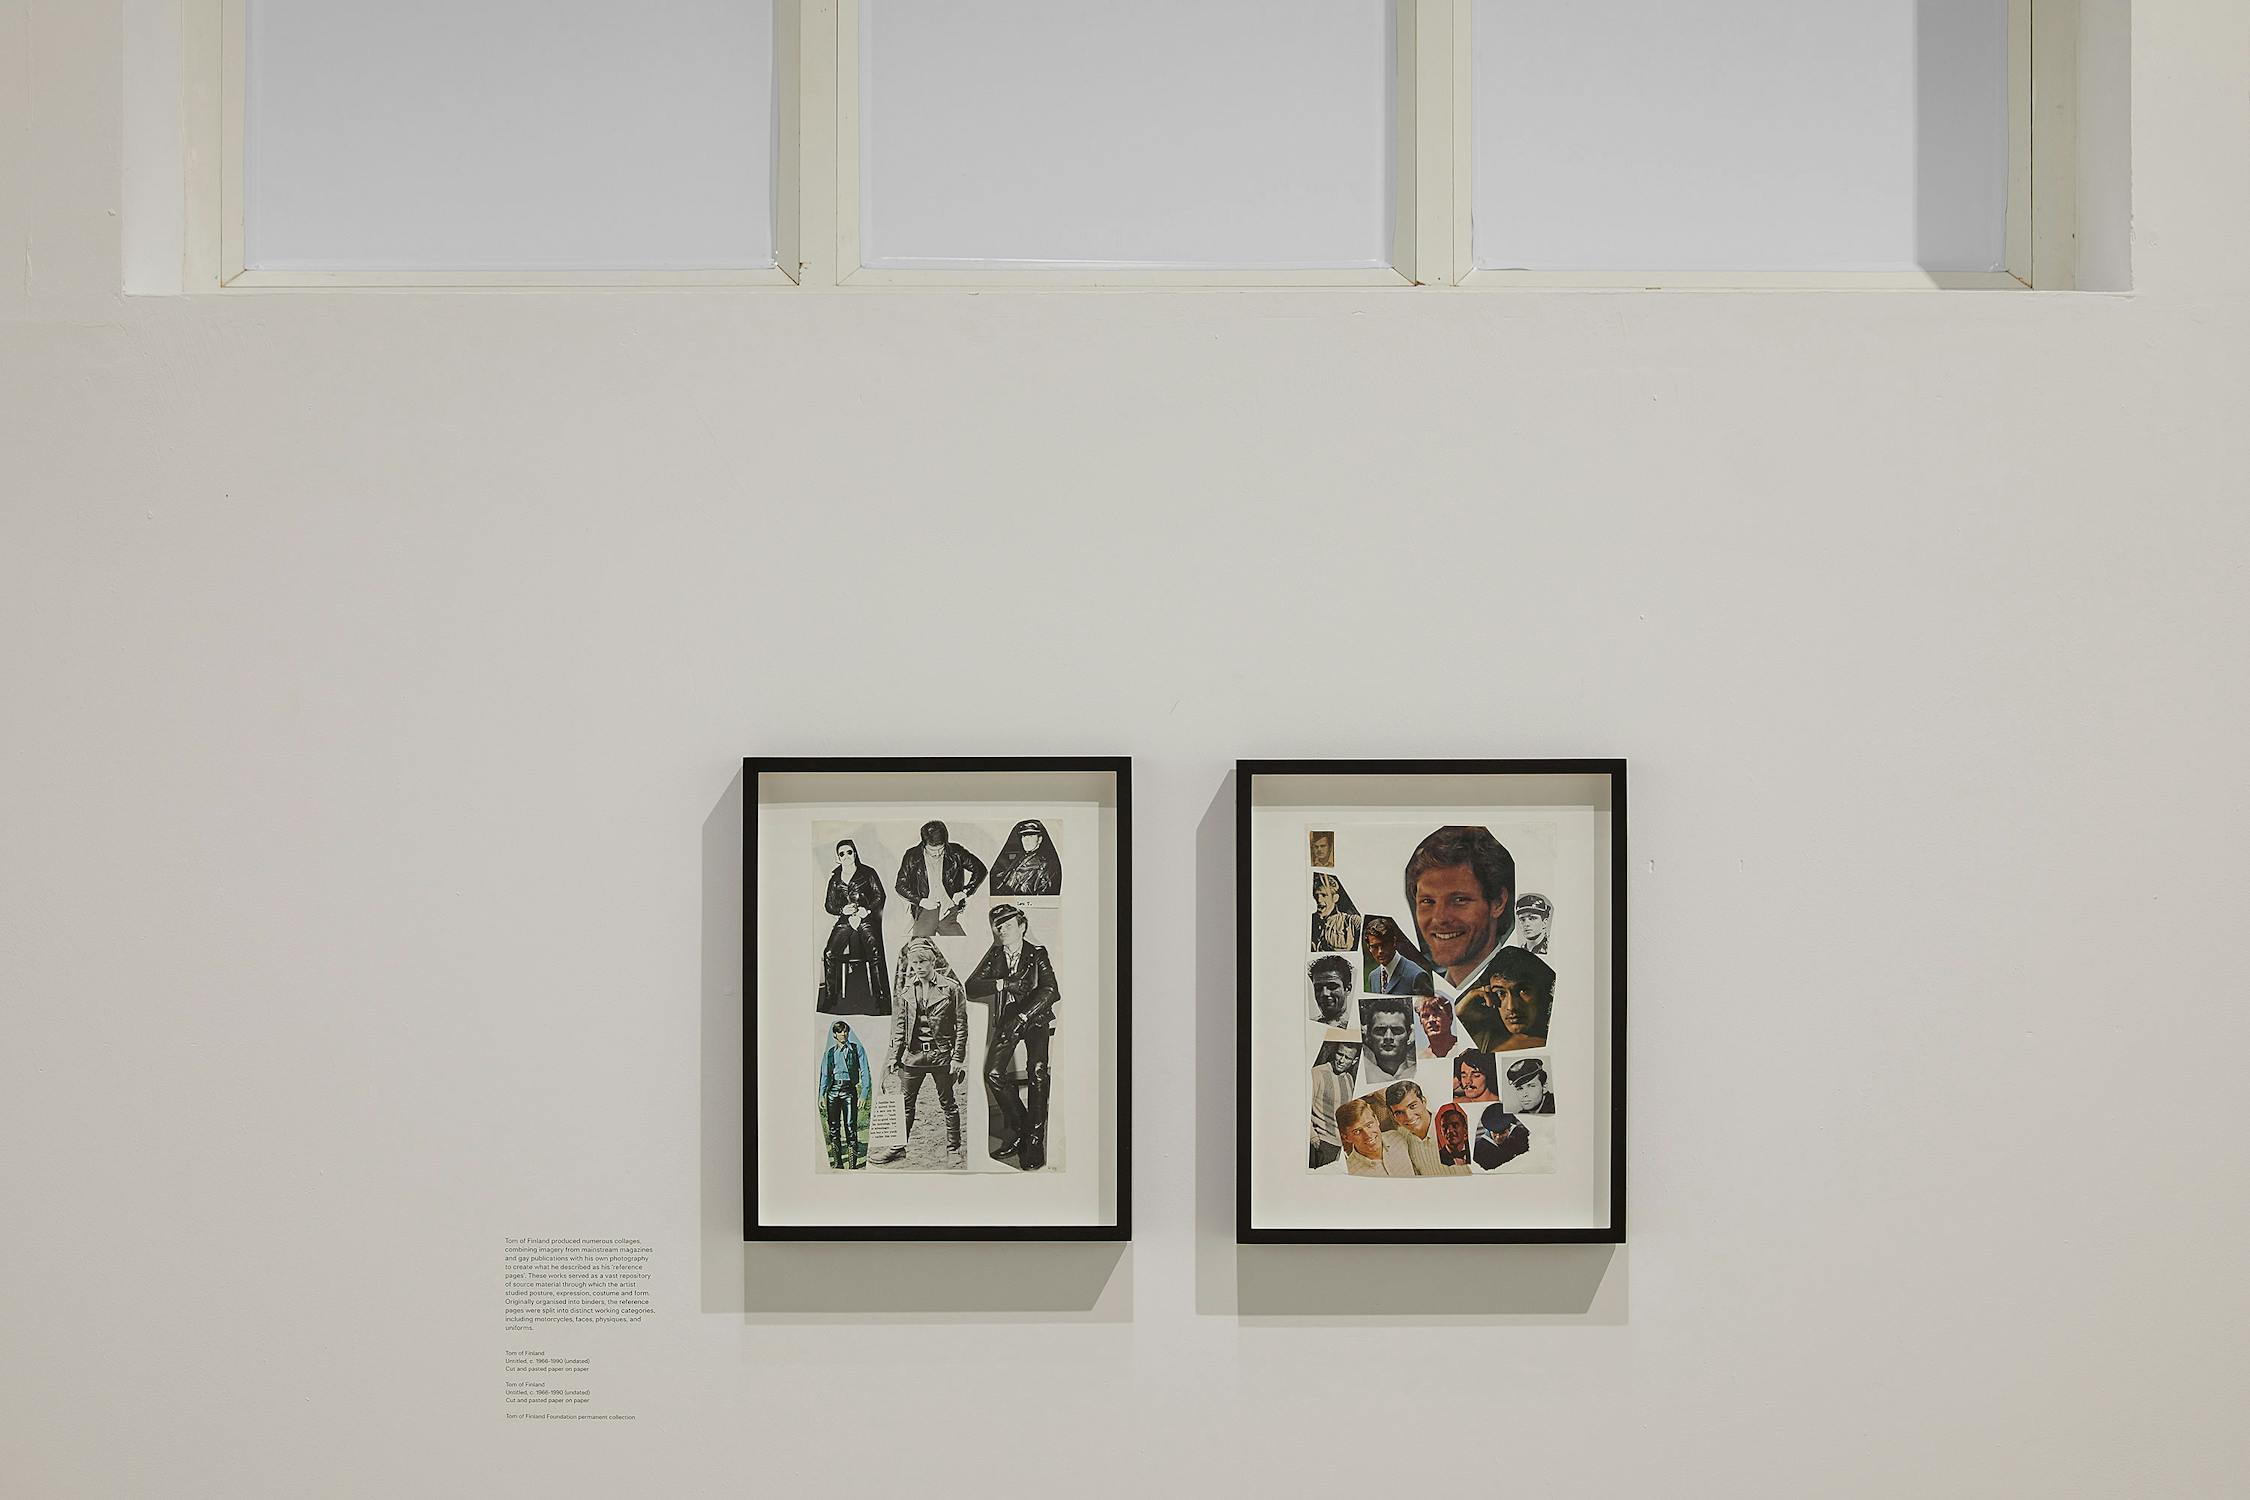 two artworks displaying cut-out collages of men in uniforms and men from physique magazines hung together on a white wall